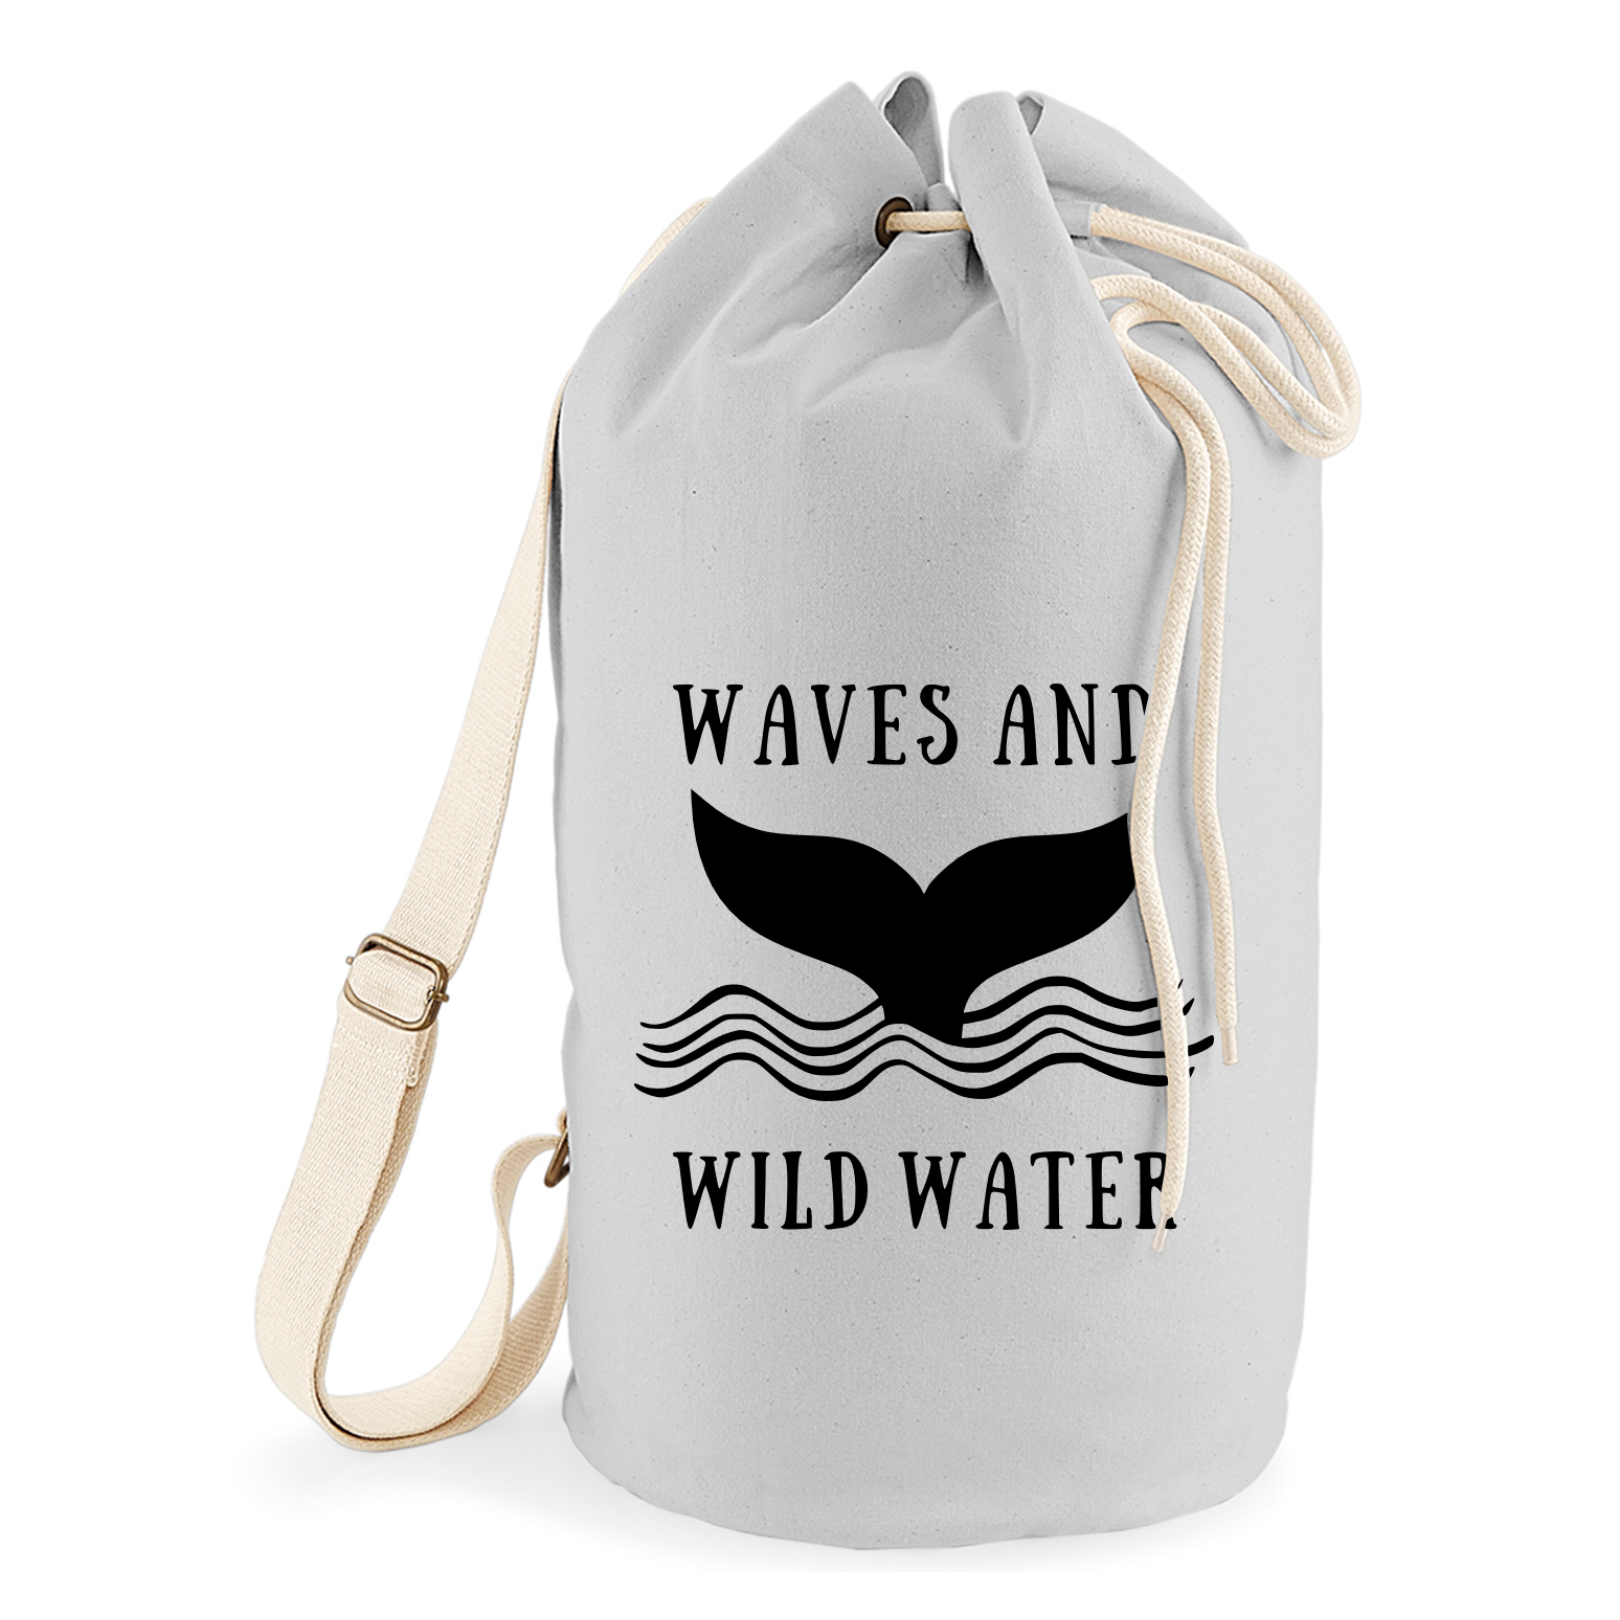 A grey sailor bag with a cream rope draw cord and webbing strap. The Waves & Wild Water logo is on the front in black.